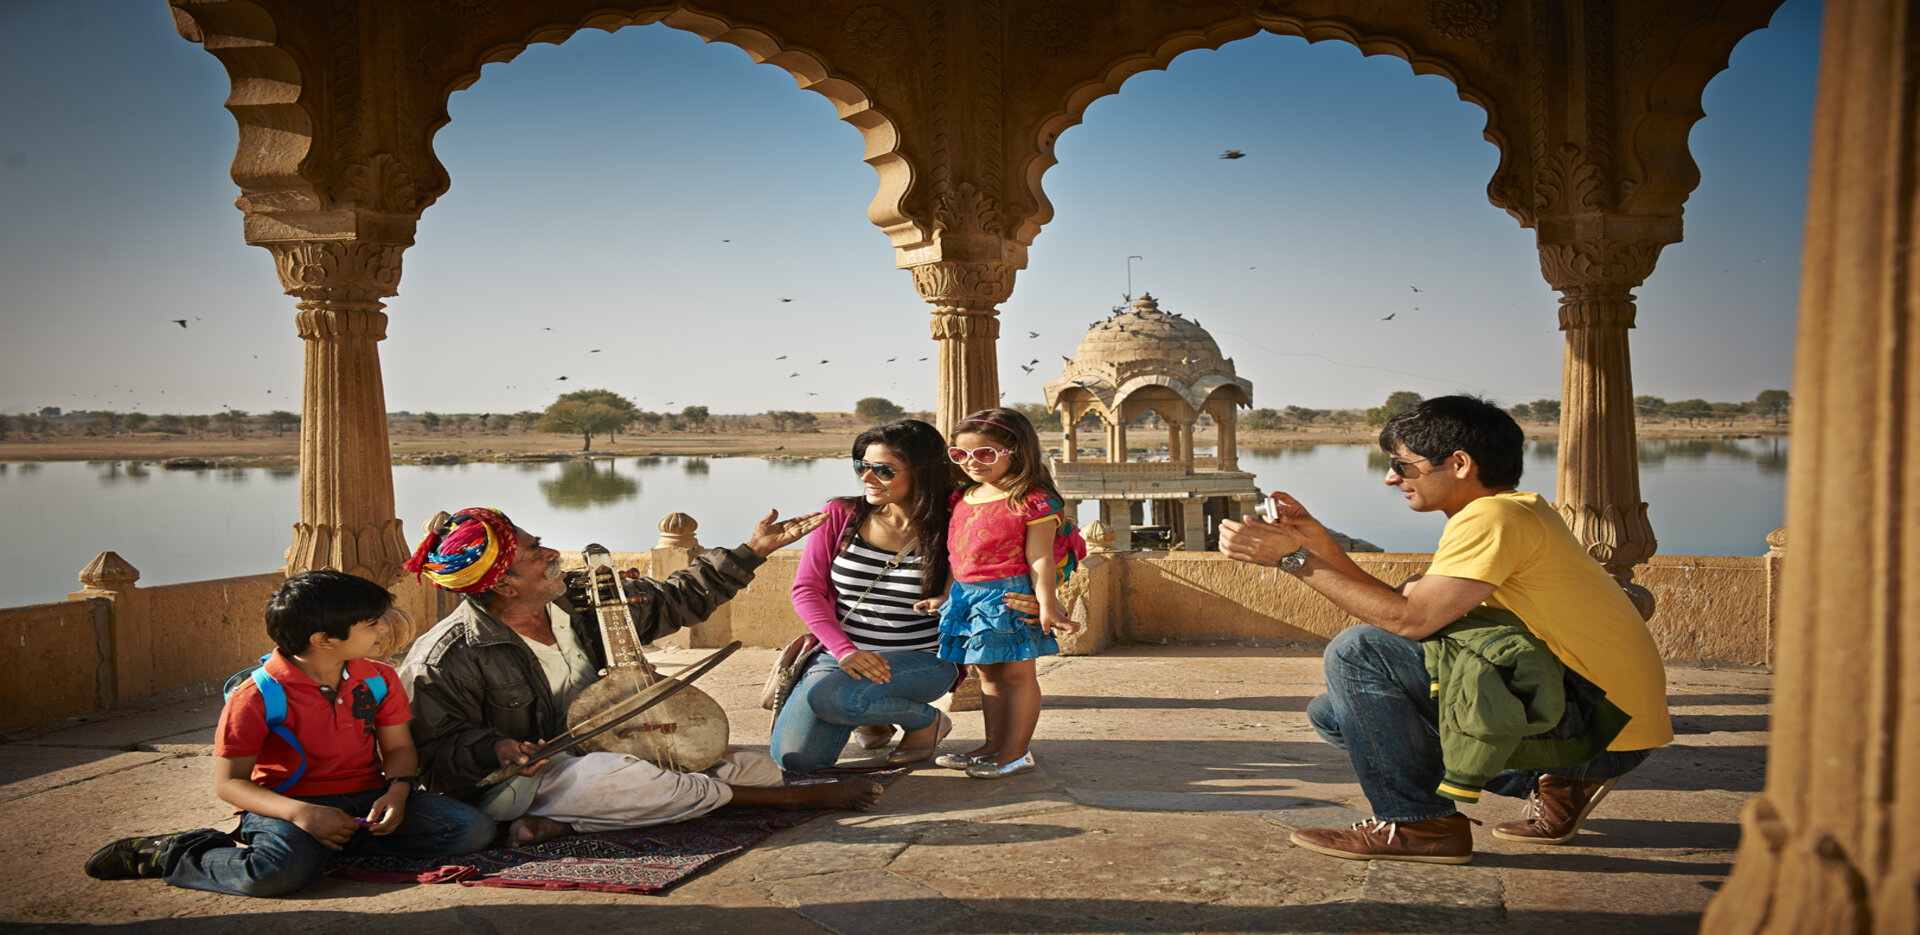 7-Day Travel Itinerary for Rajasthan